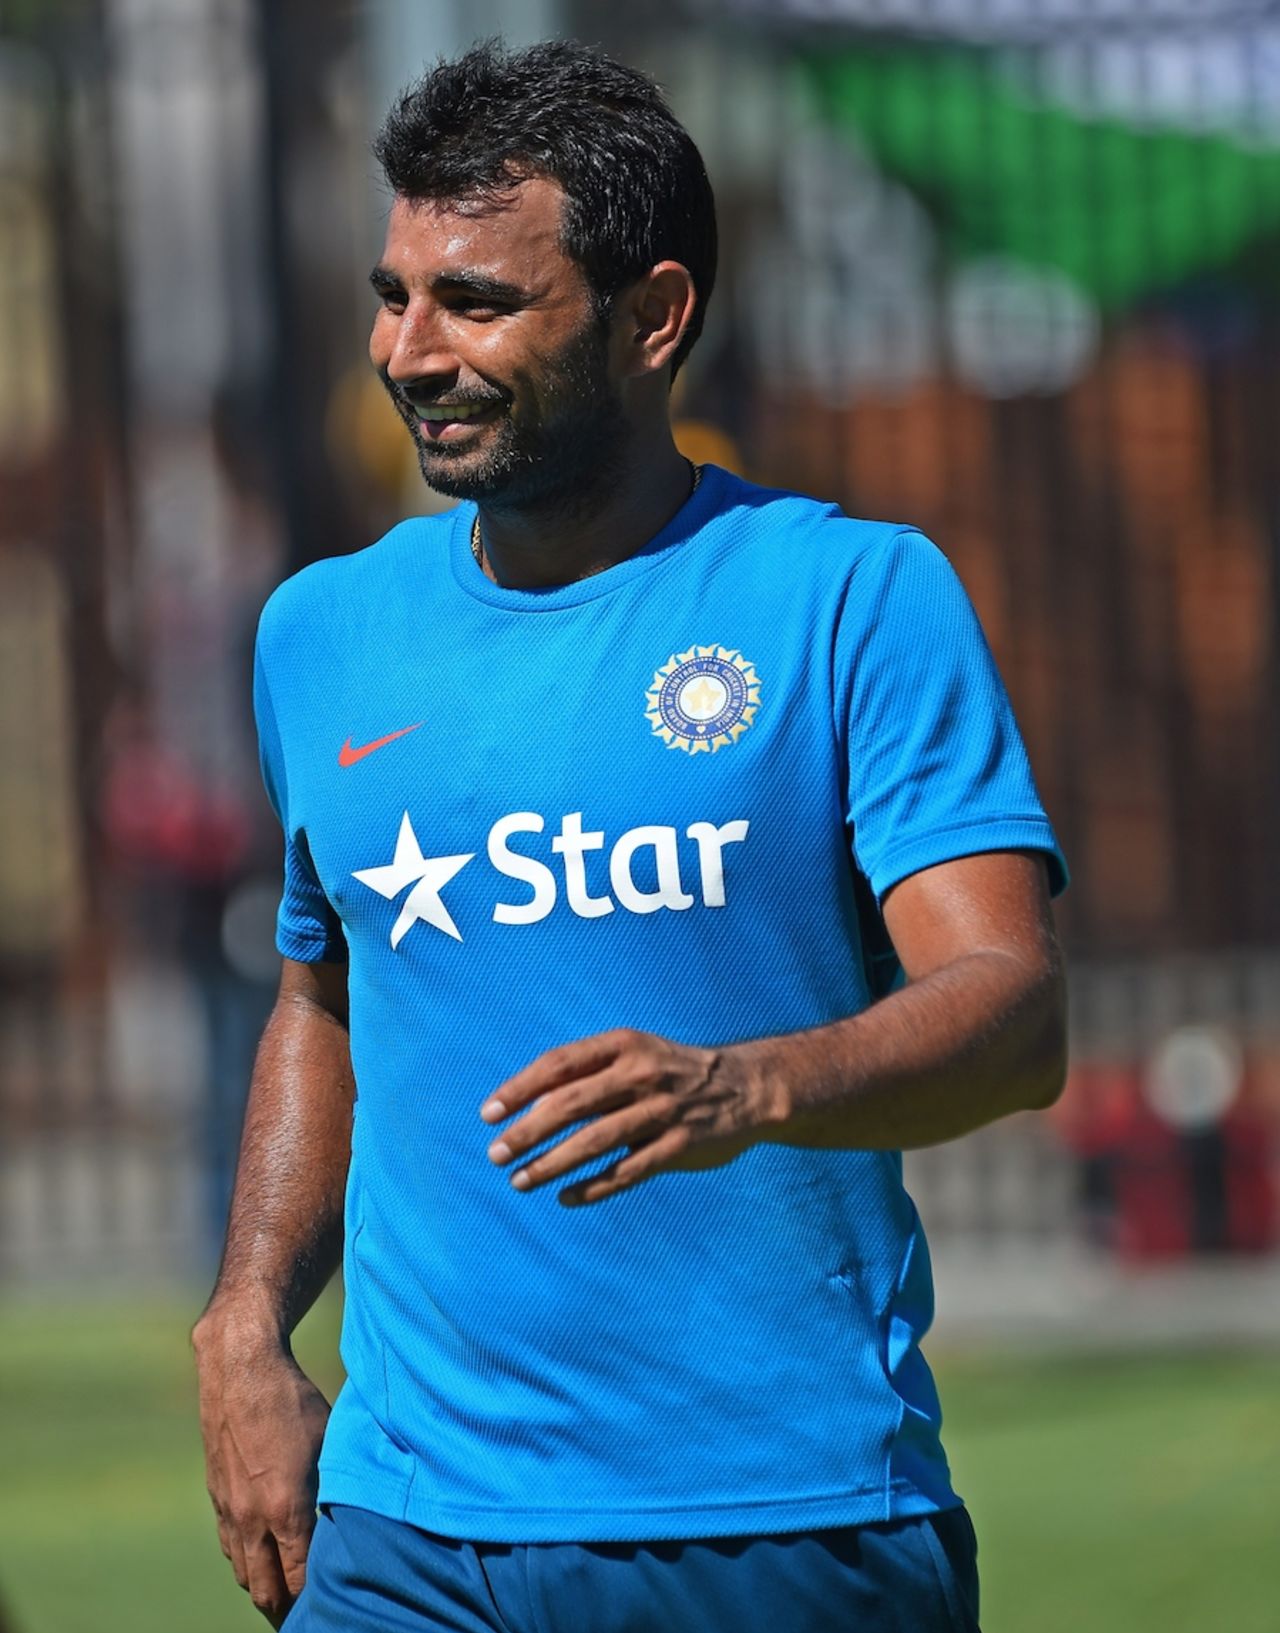 Mohammed Shami finds a reason to smile, World Cup 2015, Perth, March 5, 2015